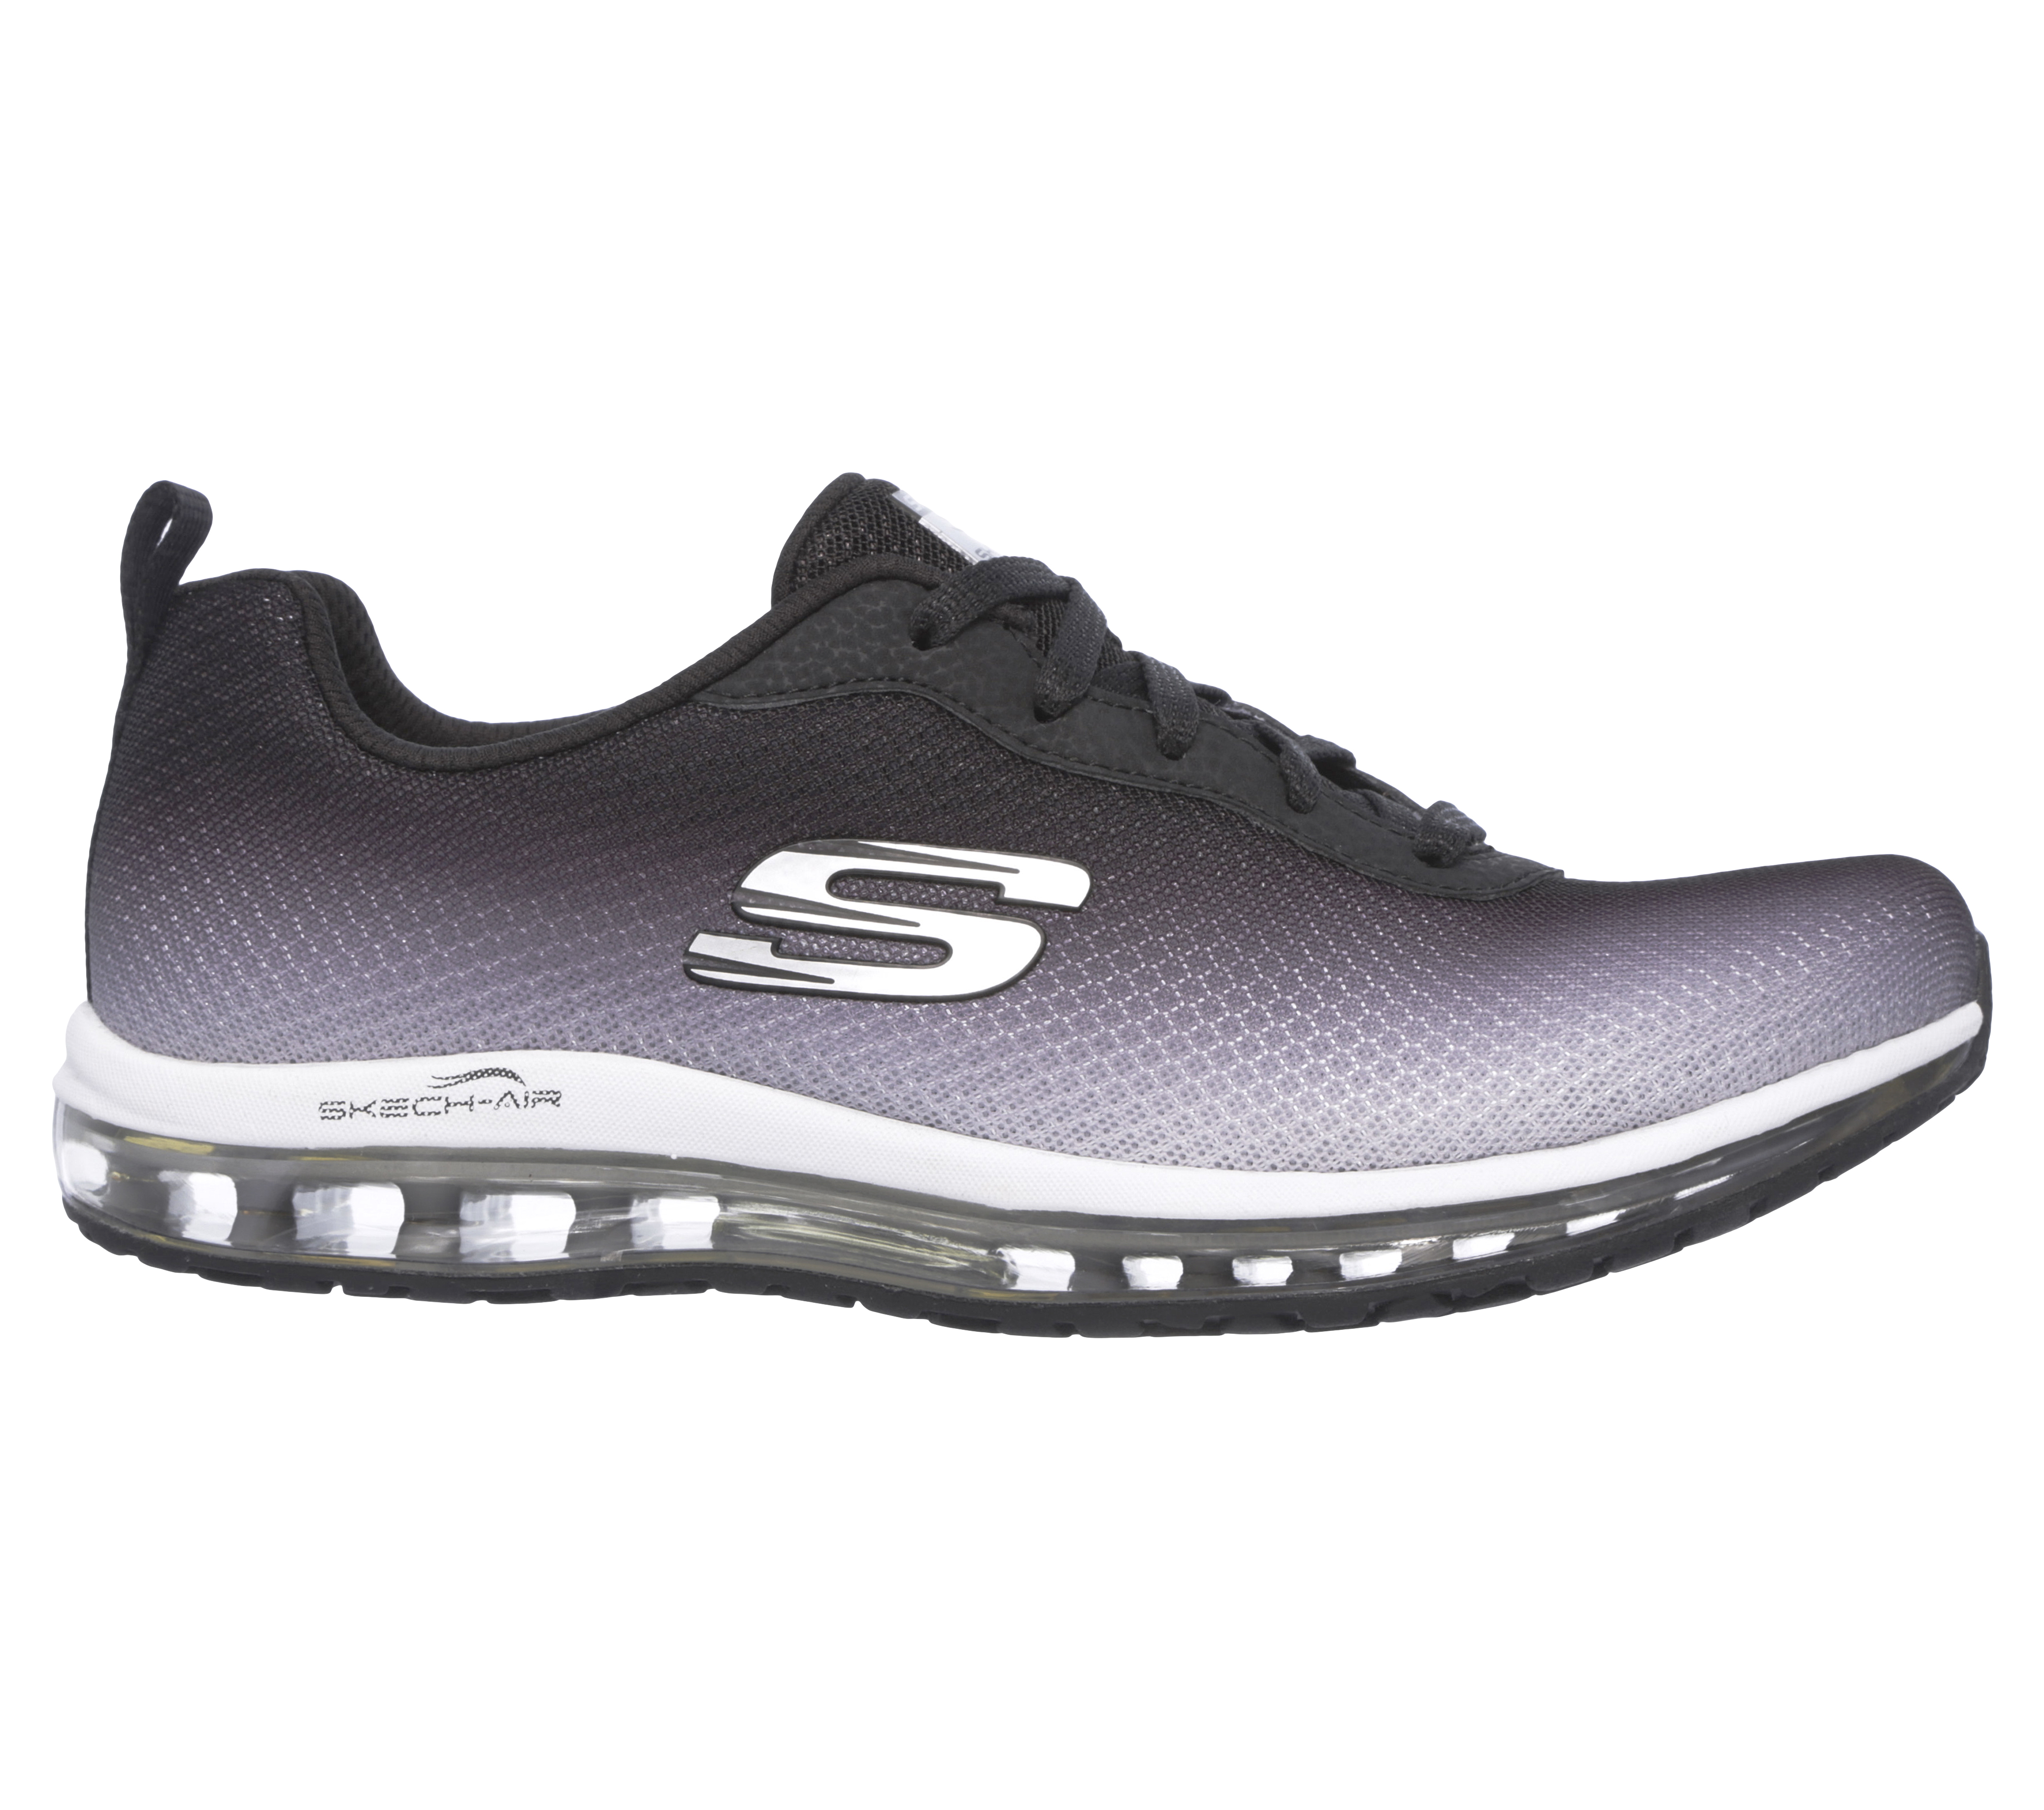 skechers new air shoes